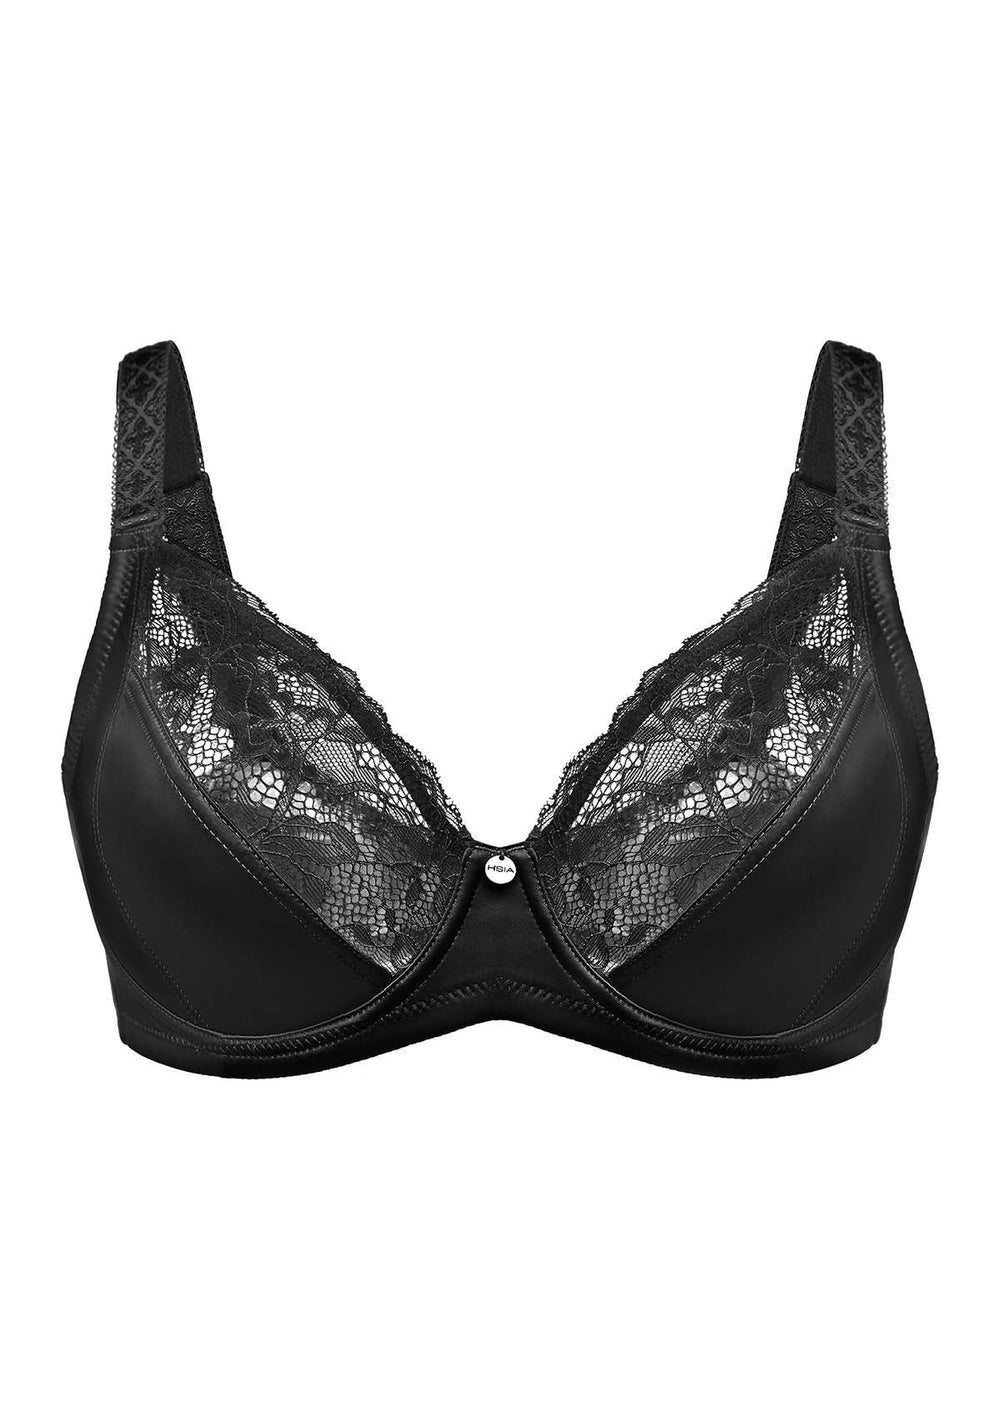 Buy SOIE- Medium Coverage Non Padded Wired Lace Demi Cup Bra (Pack